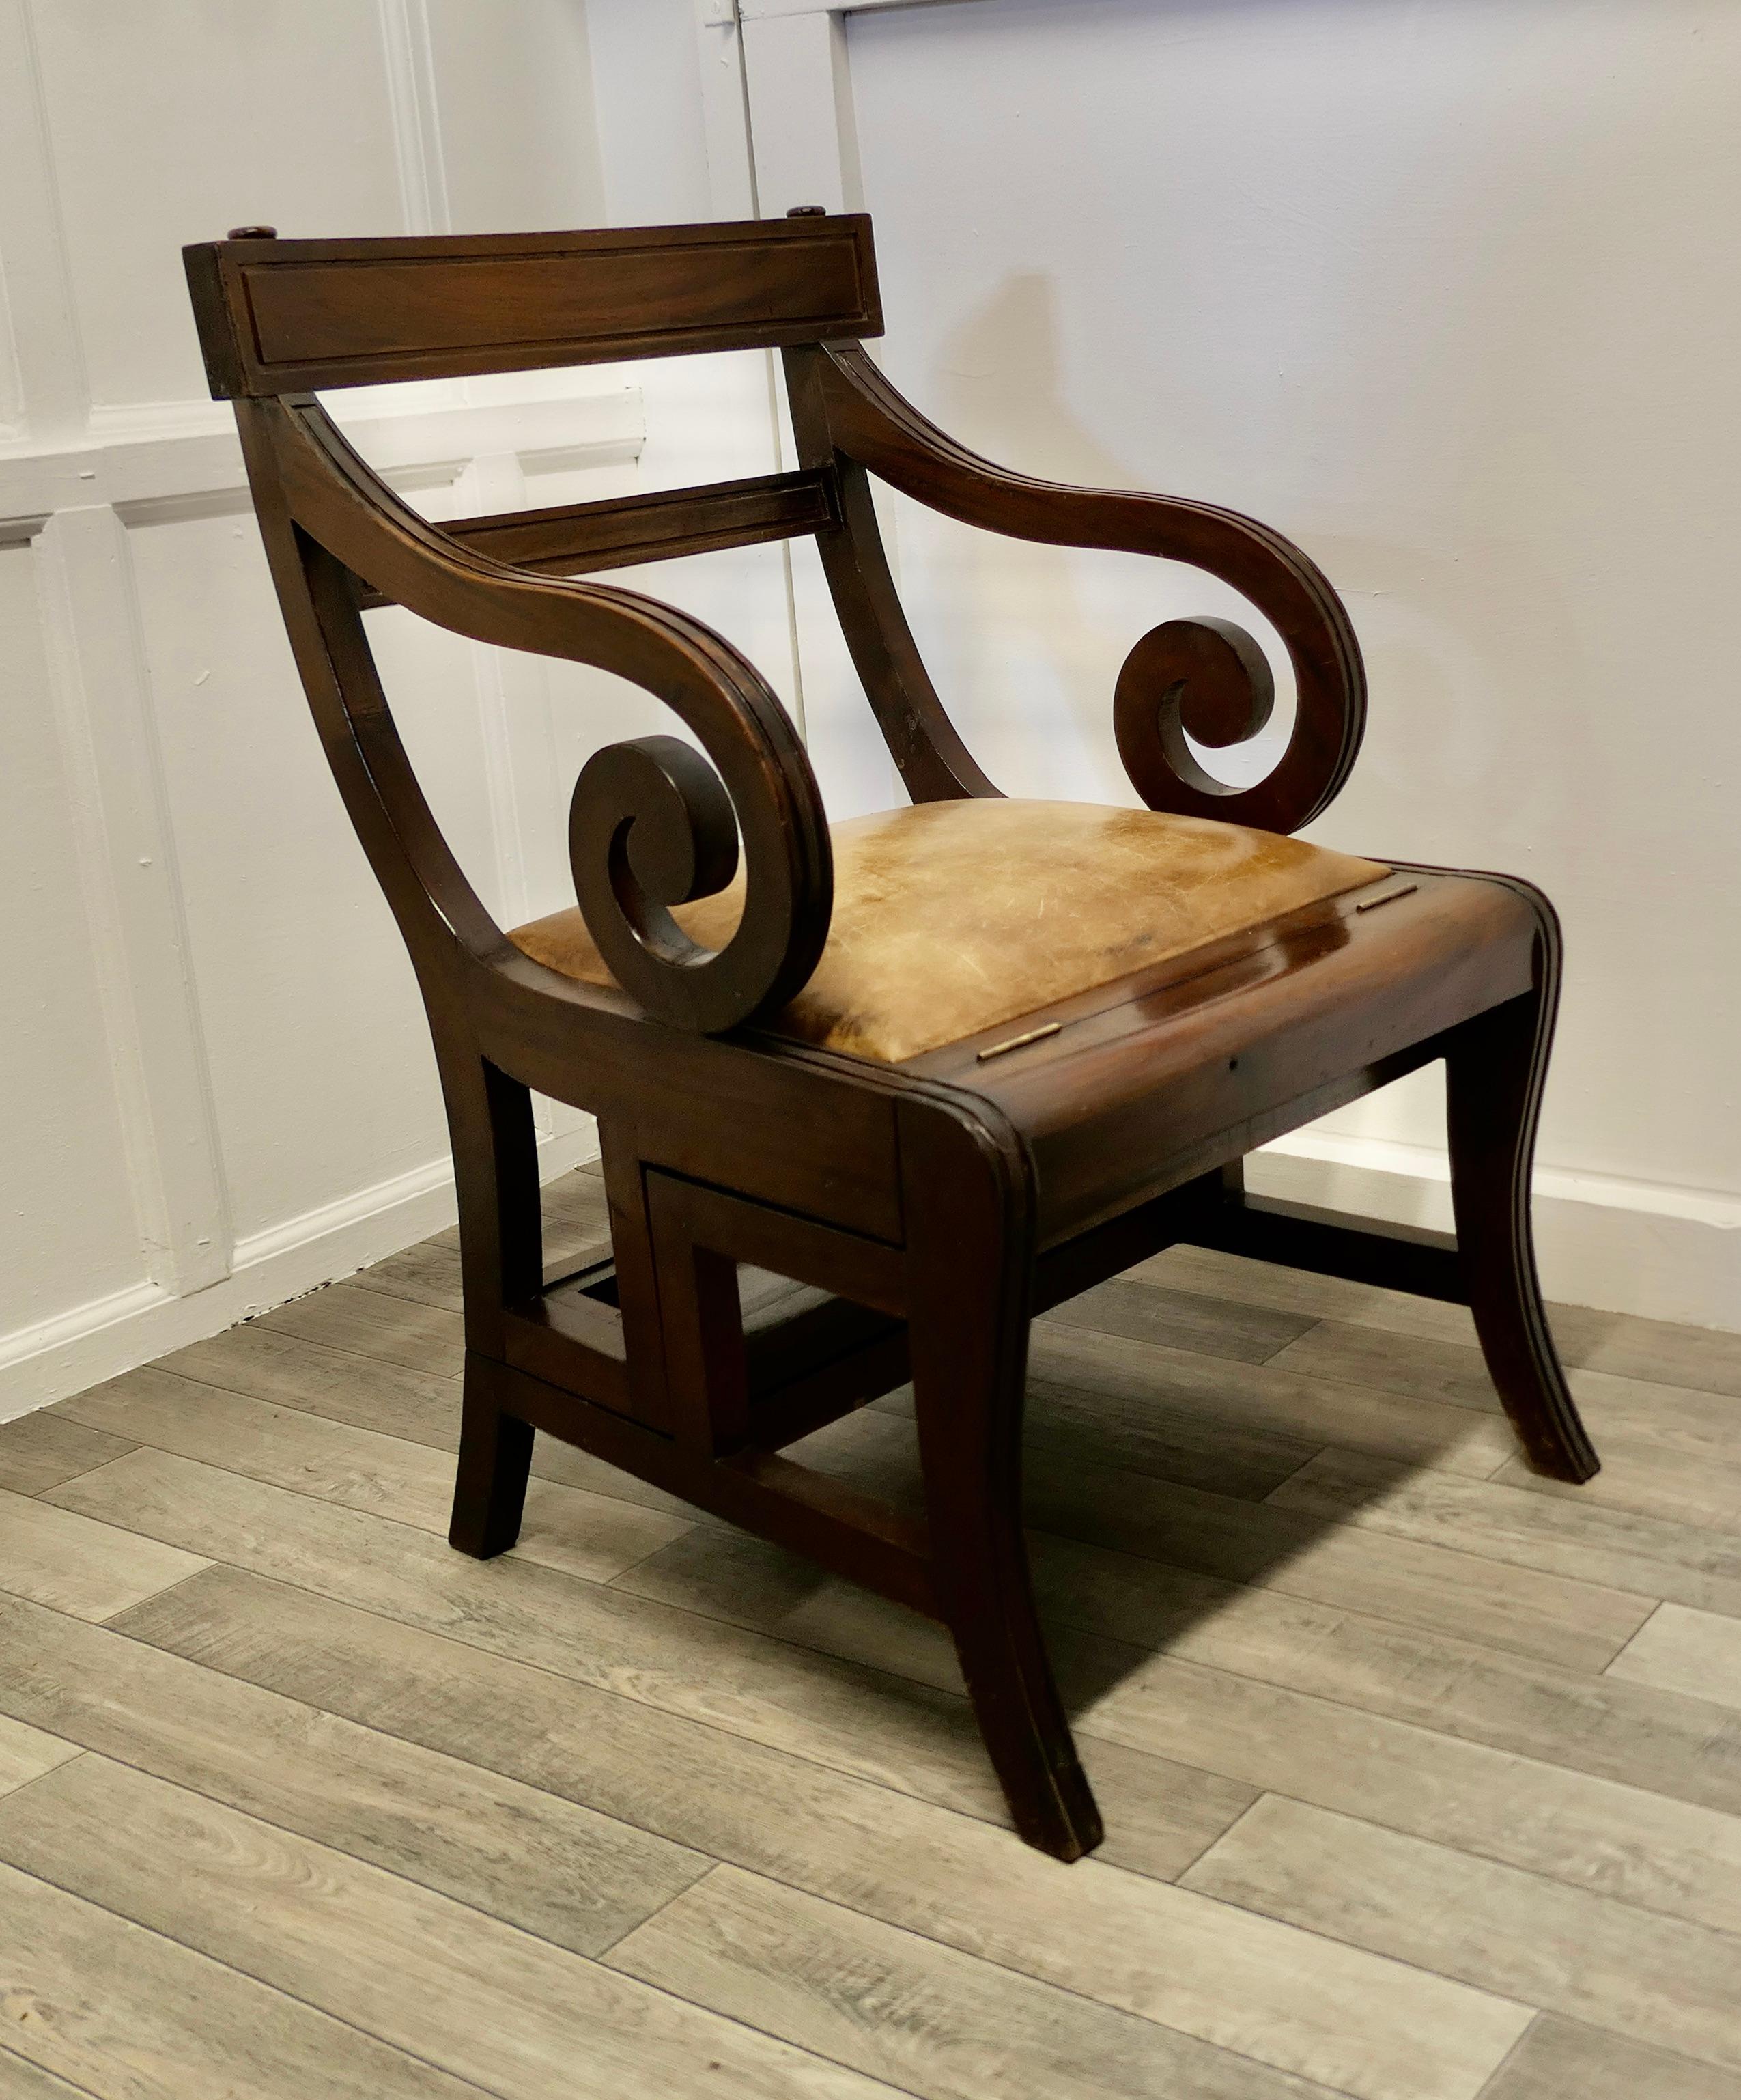 Large Metamorphic library chair or library steps

A superb and useful piece, this roomy and comfortable Regency style chair can be flipped over and turned into a 4 step ladder
The chair has been sympathetically restored, the leather treads for